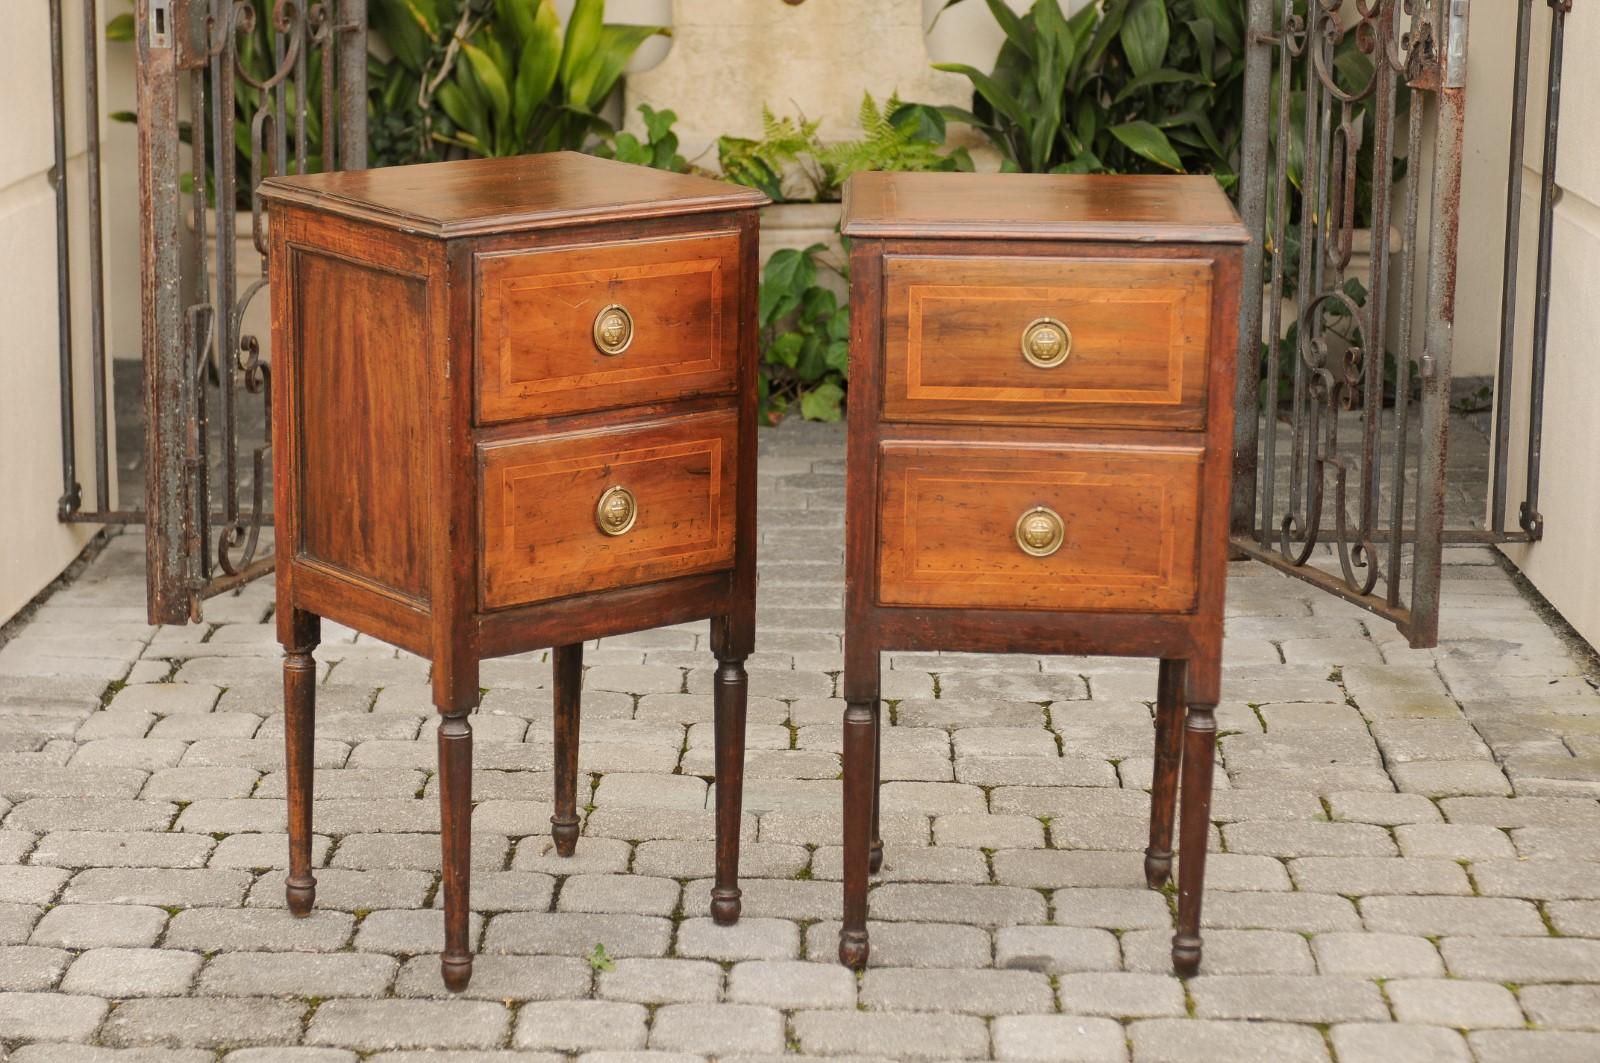 A pair of petite Italian walnut two-drawer commodes from the early 19th century with crossbanded inlay and turned legs. Each of this pair of small Italian commodes features a rectangular top, adorned with a delicate crossbanded inlay and beveled